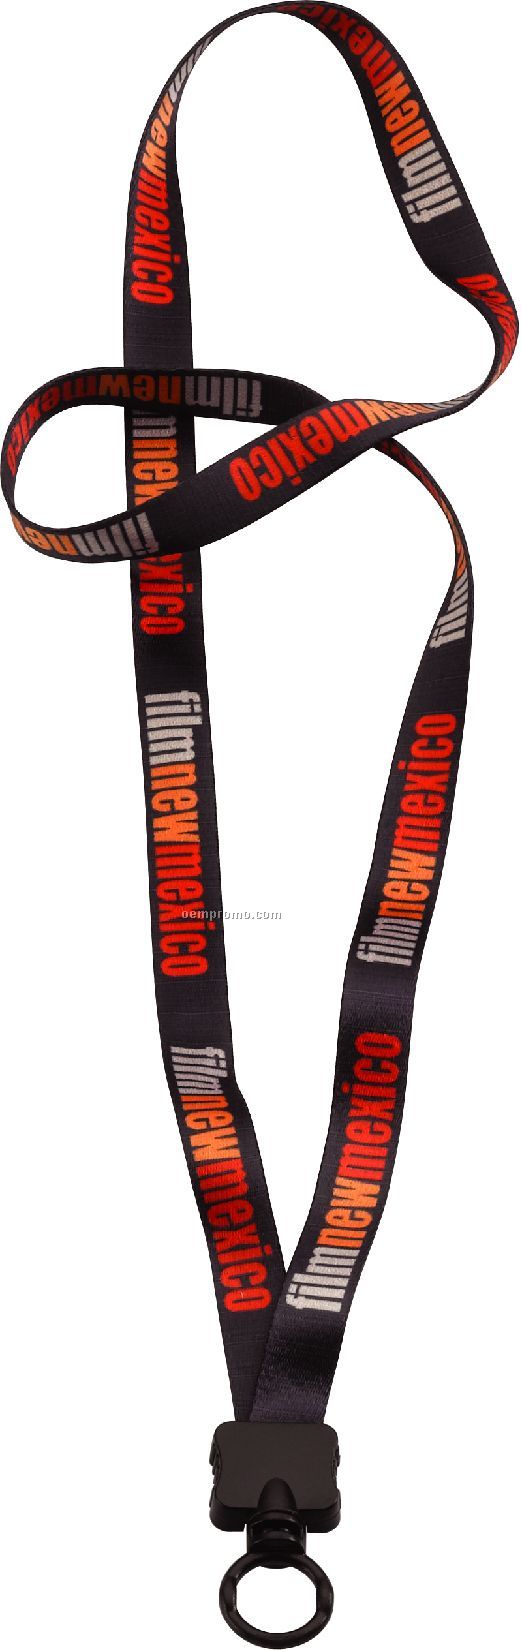 1/2" Rpet Dye Sublimated Lanyard With Plastic Clamshell & O-ring